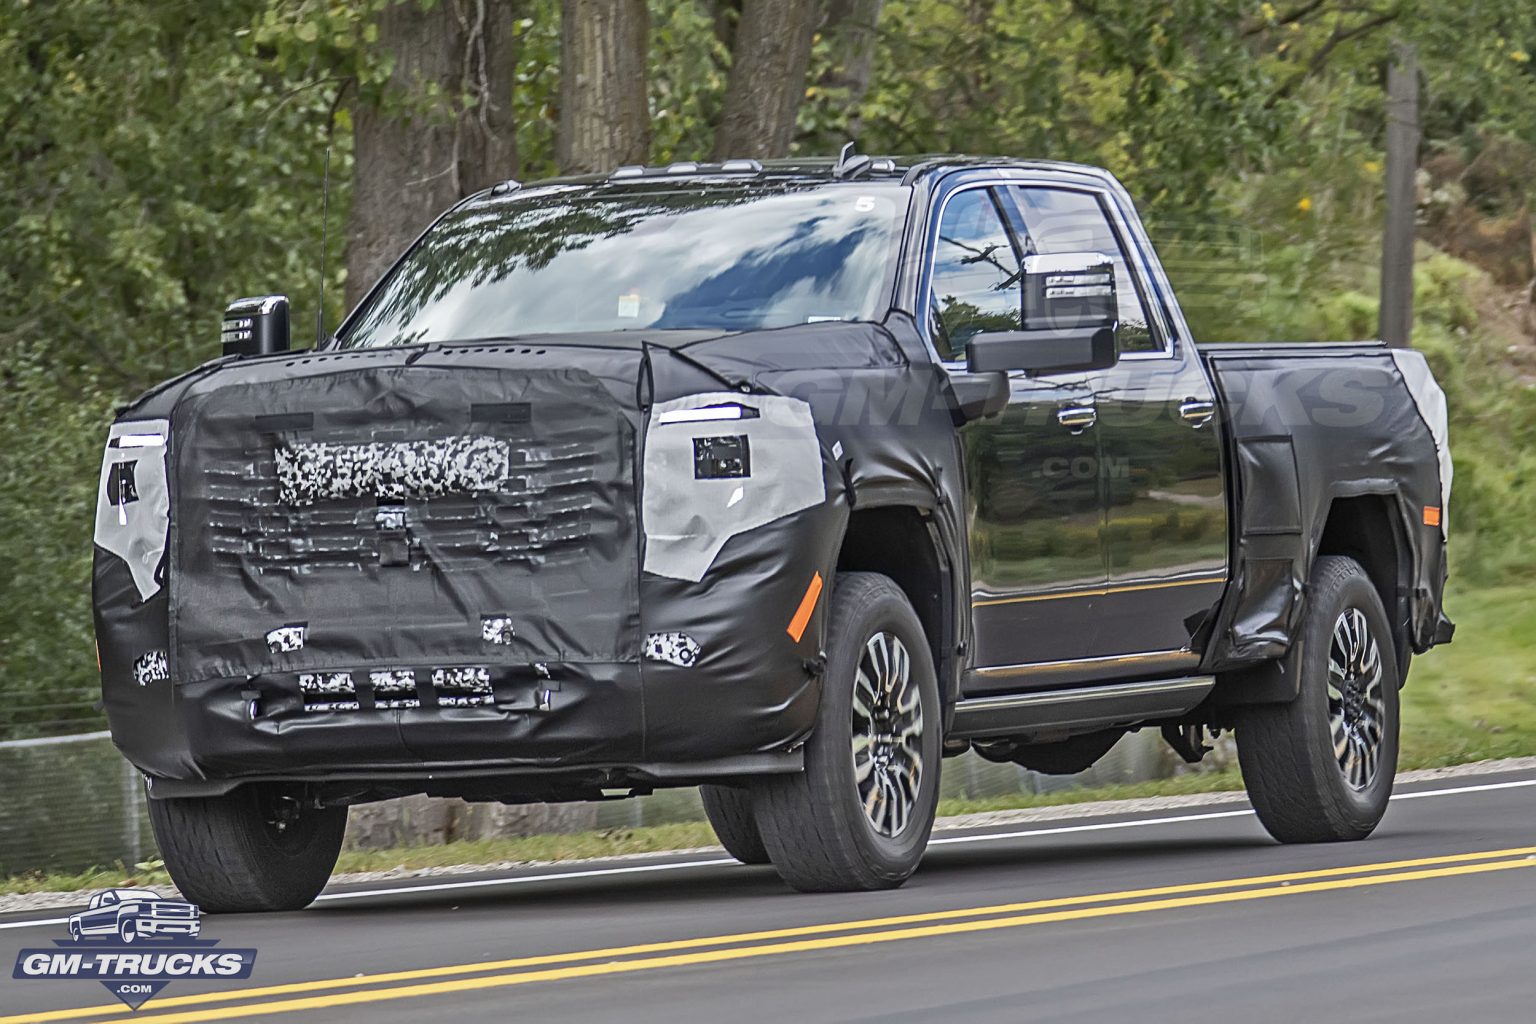 Refreshed 2023 GMC Sierra HD Prototype Caught With Production